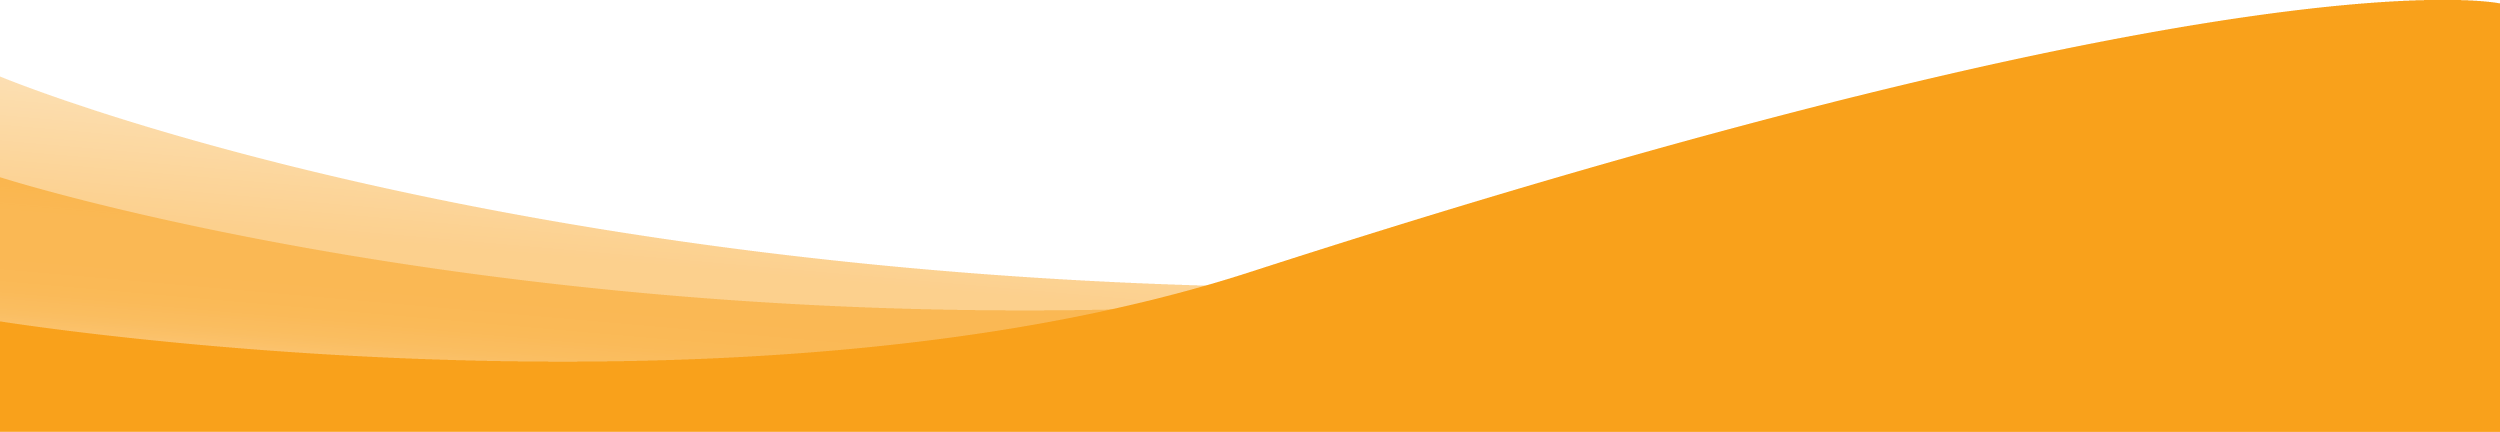 Orange Abstract Lines PNG Picture